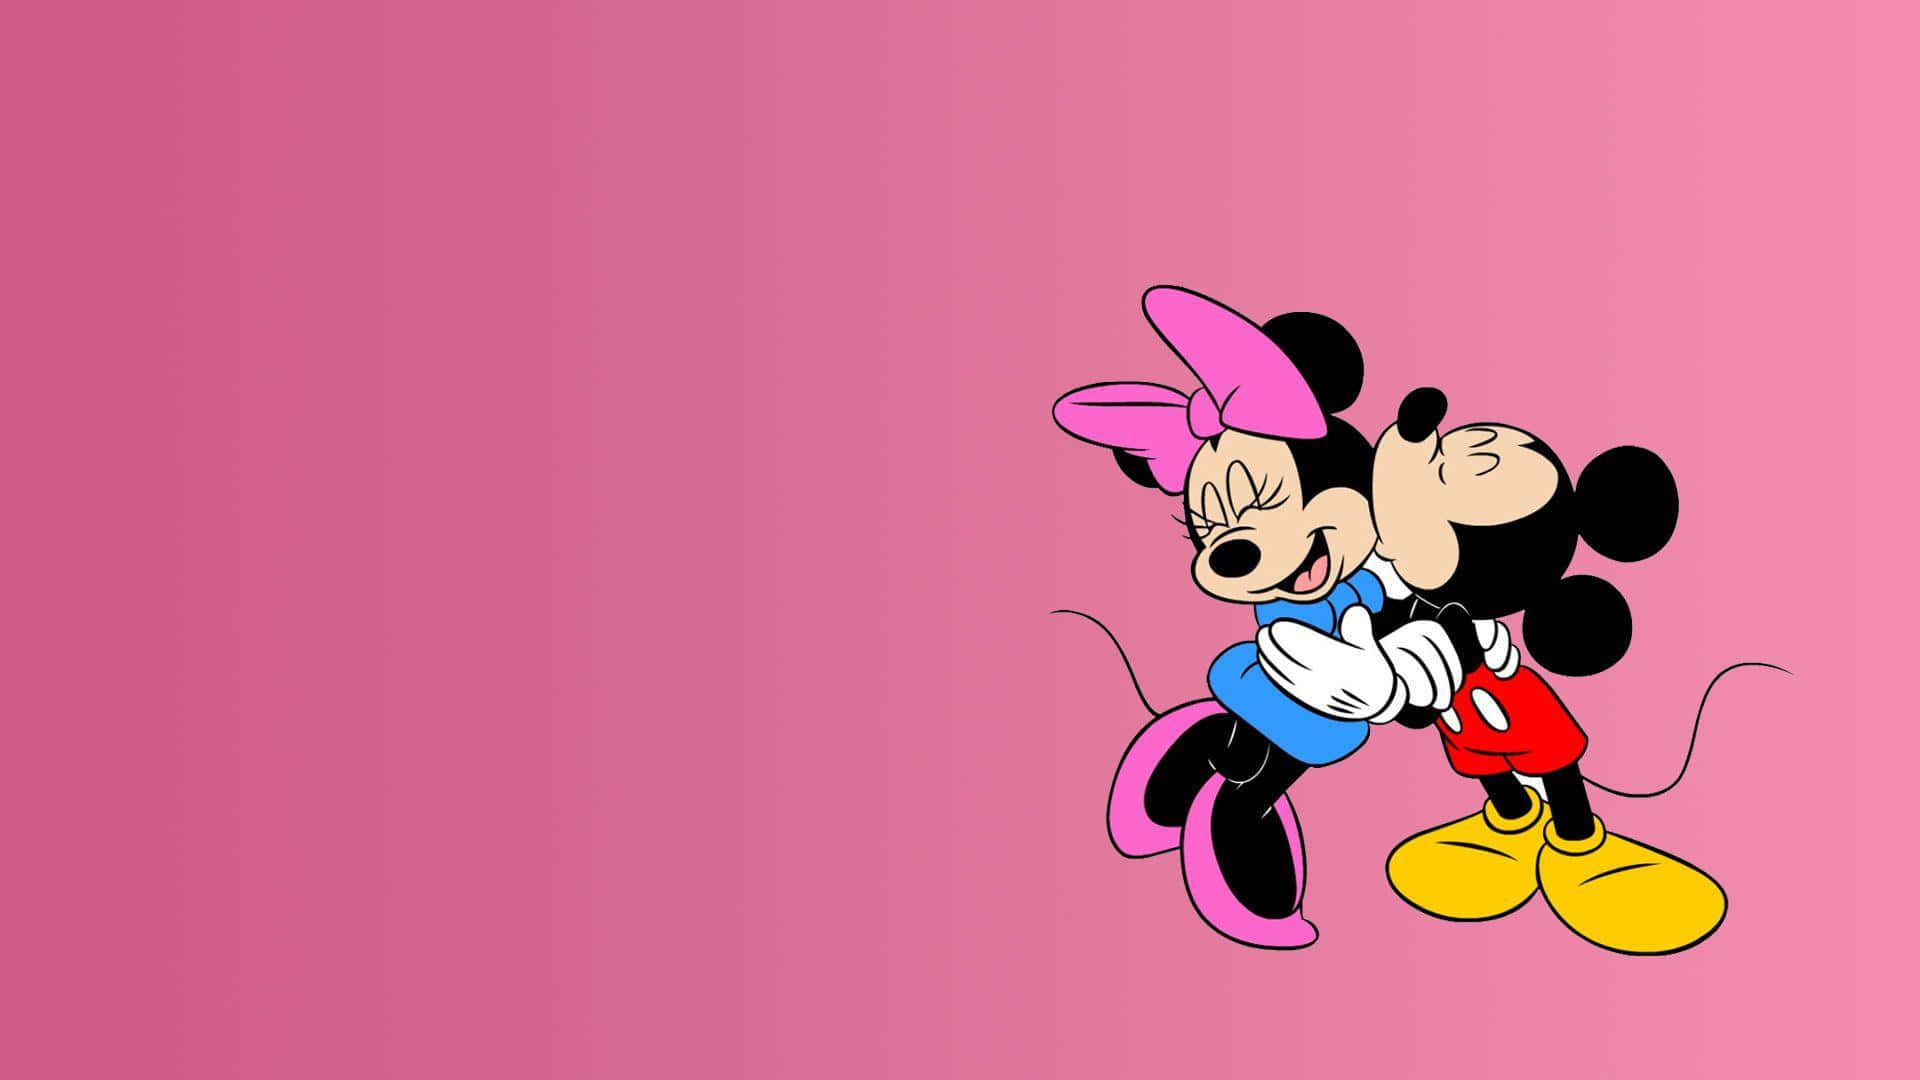 Minnie  Mickey mouse wallpaper, Minnie mouse pictures, Disney wallpaper